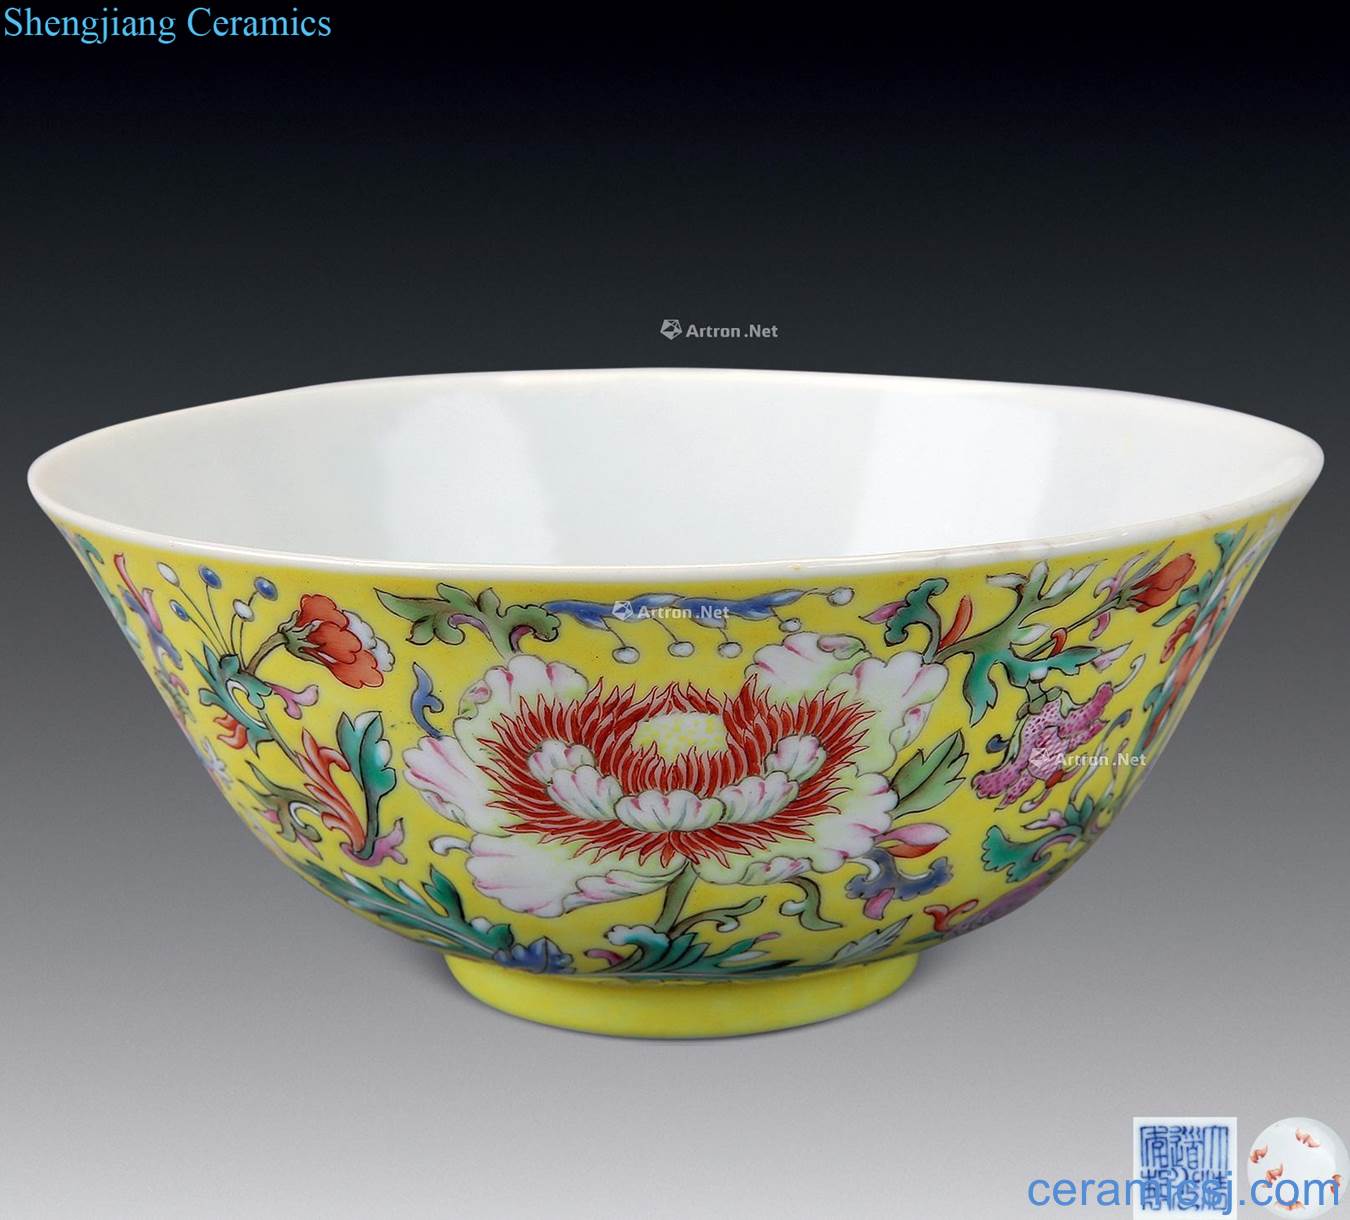 Qing daoguang Wufu bowl to color the flowers yellow